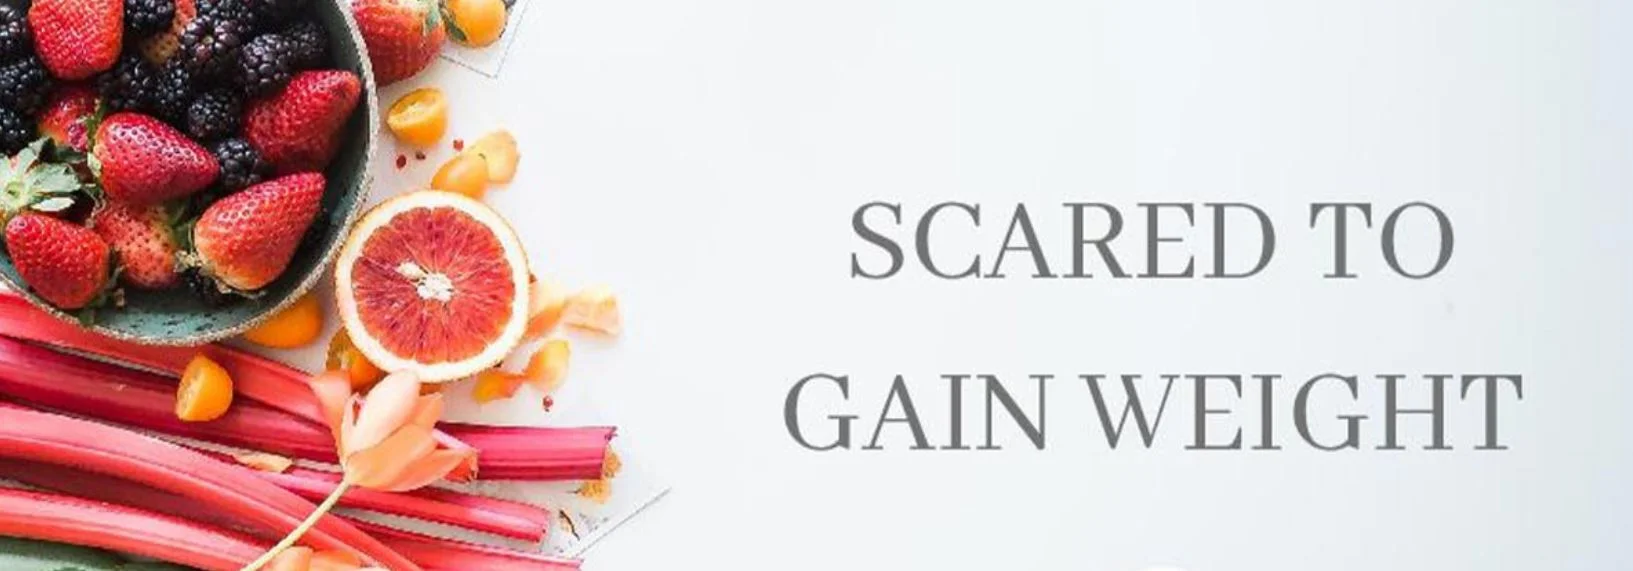 Scared-to-Gain-weight-after-Sweating-healthlivingyoga.com